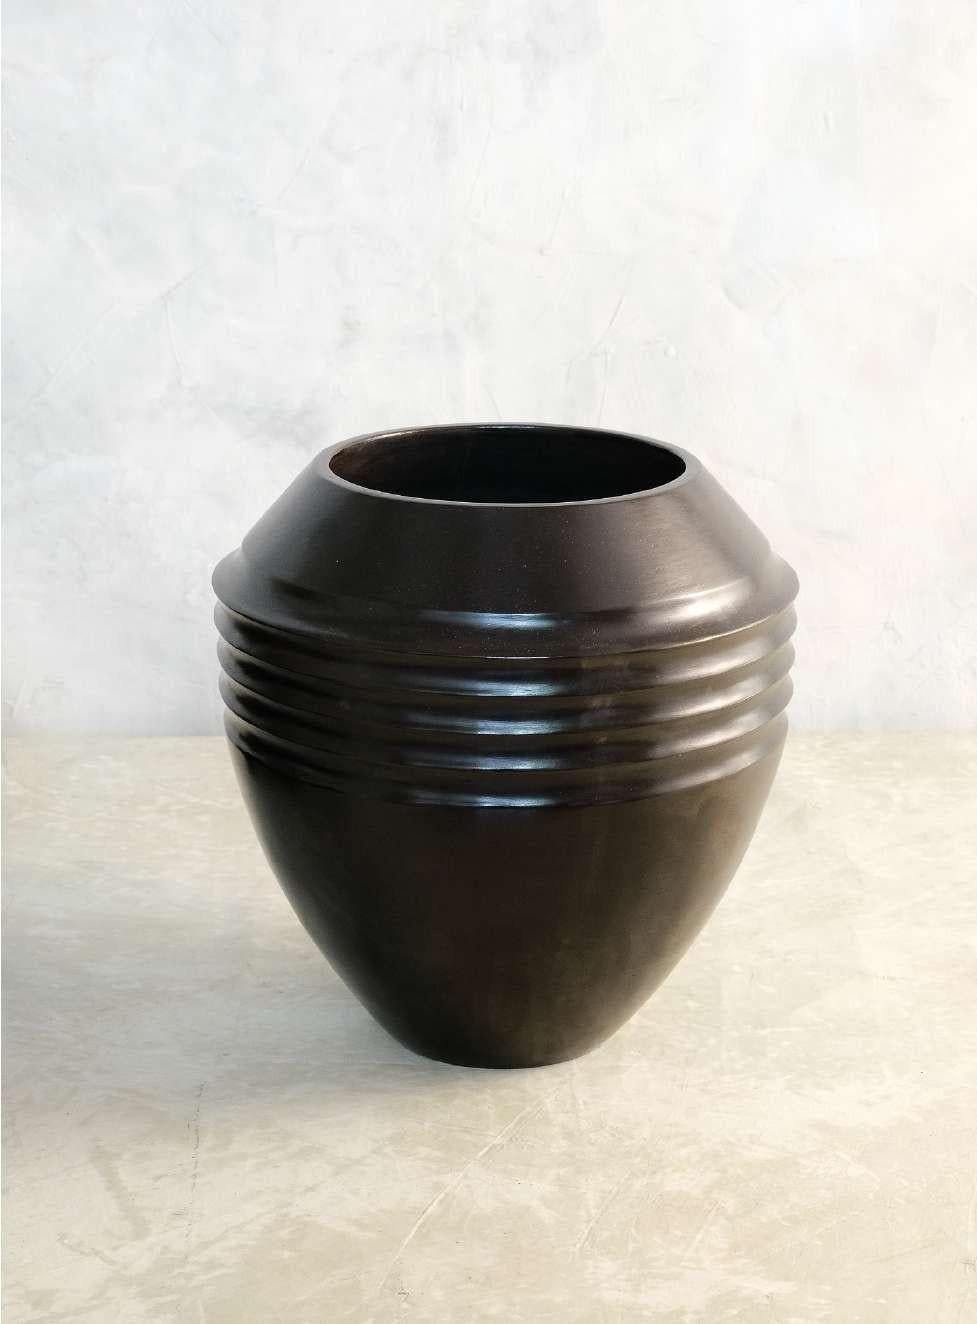 Pair of cascabel vase by Onora.
Dimensions: D 30 x H 28 cm.
Materials: clay.

This collection reinterprets one of the oldest structural techniques in pottery, coiling, the vessels made with this technique are made from coils of clay positioned